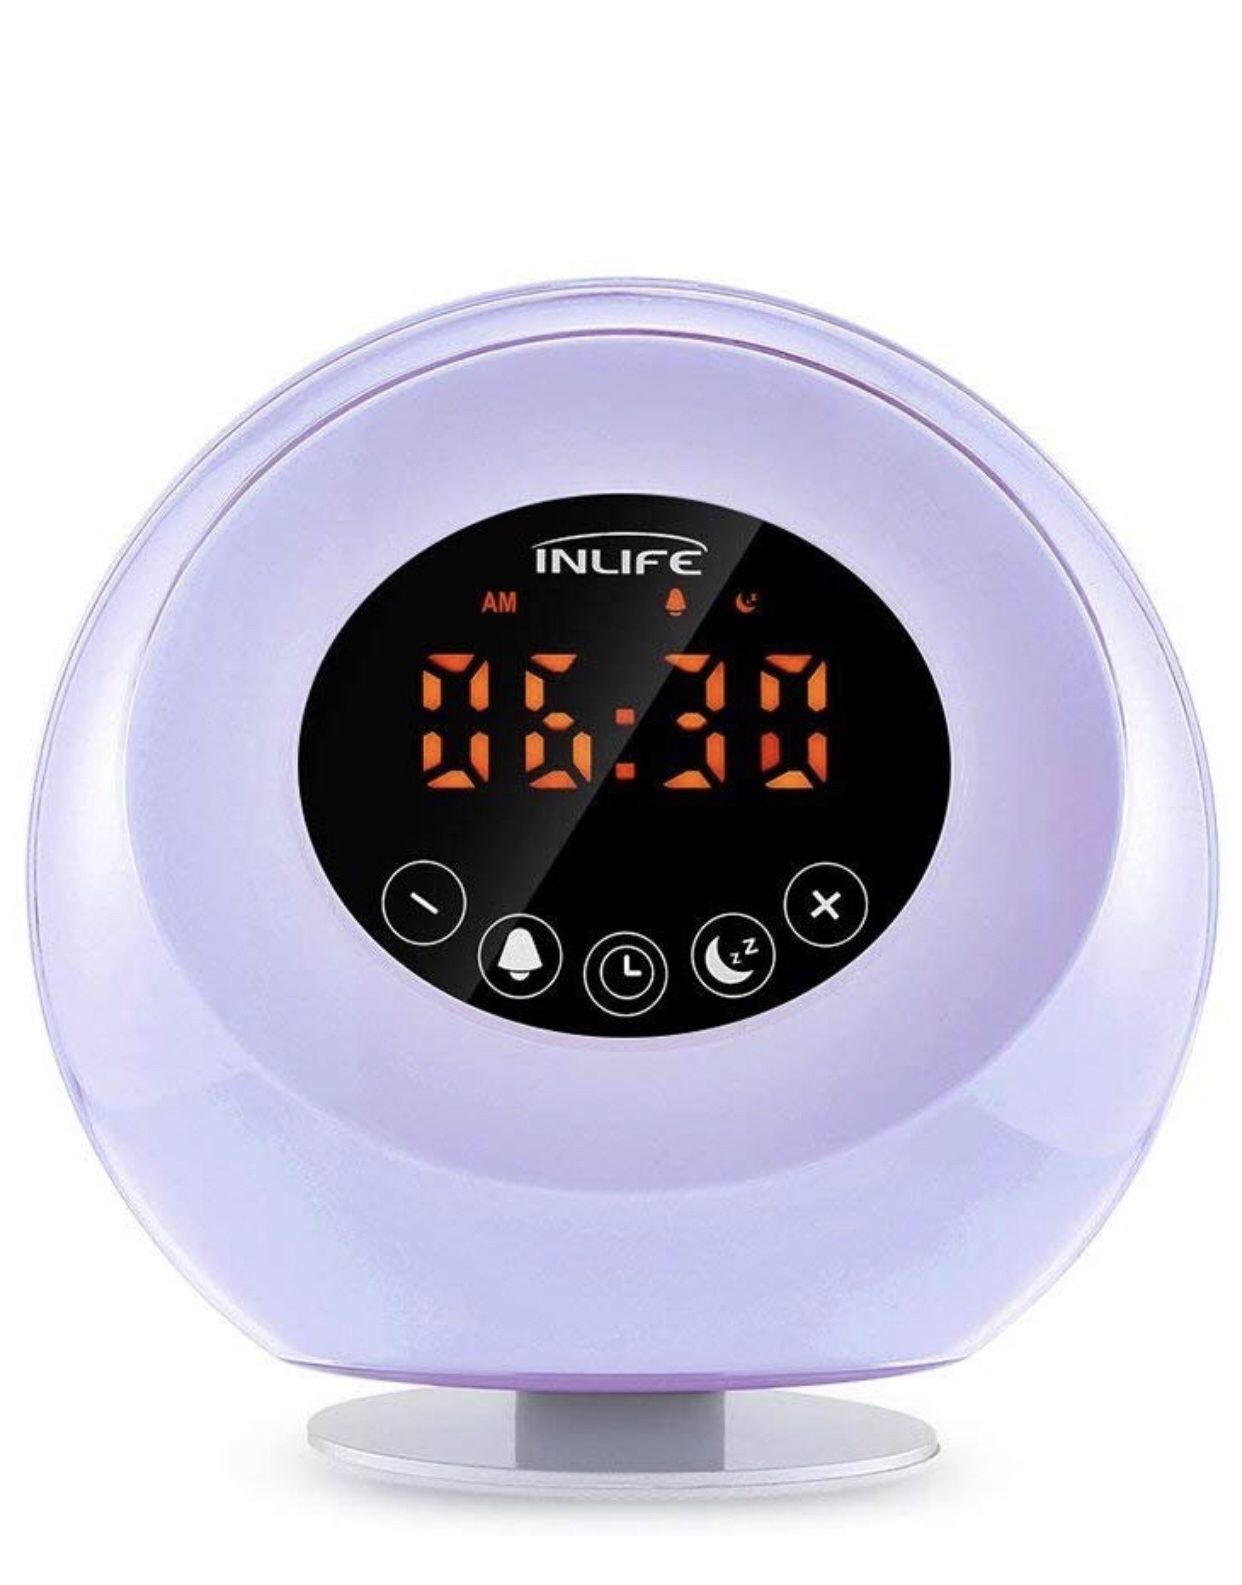 Wake up alarm clock with radio, 6 natural sounds, 3 warm white light mode & 7 colors: warm yellow, red, green, blue, purple, orange, and indigo.